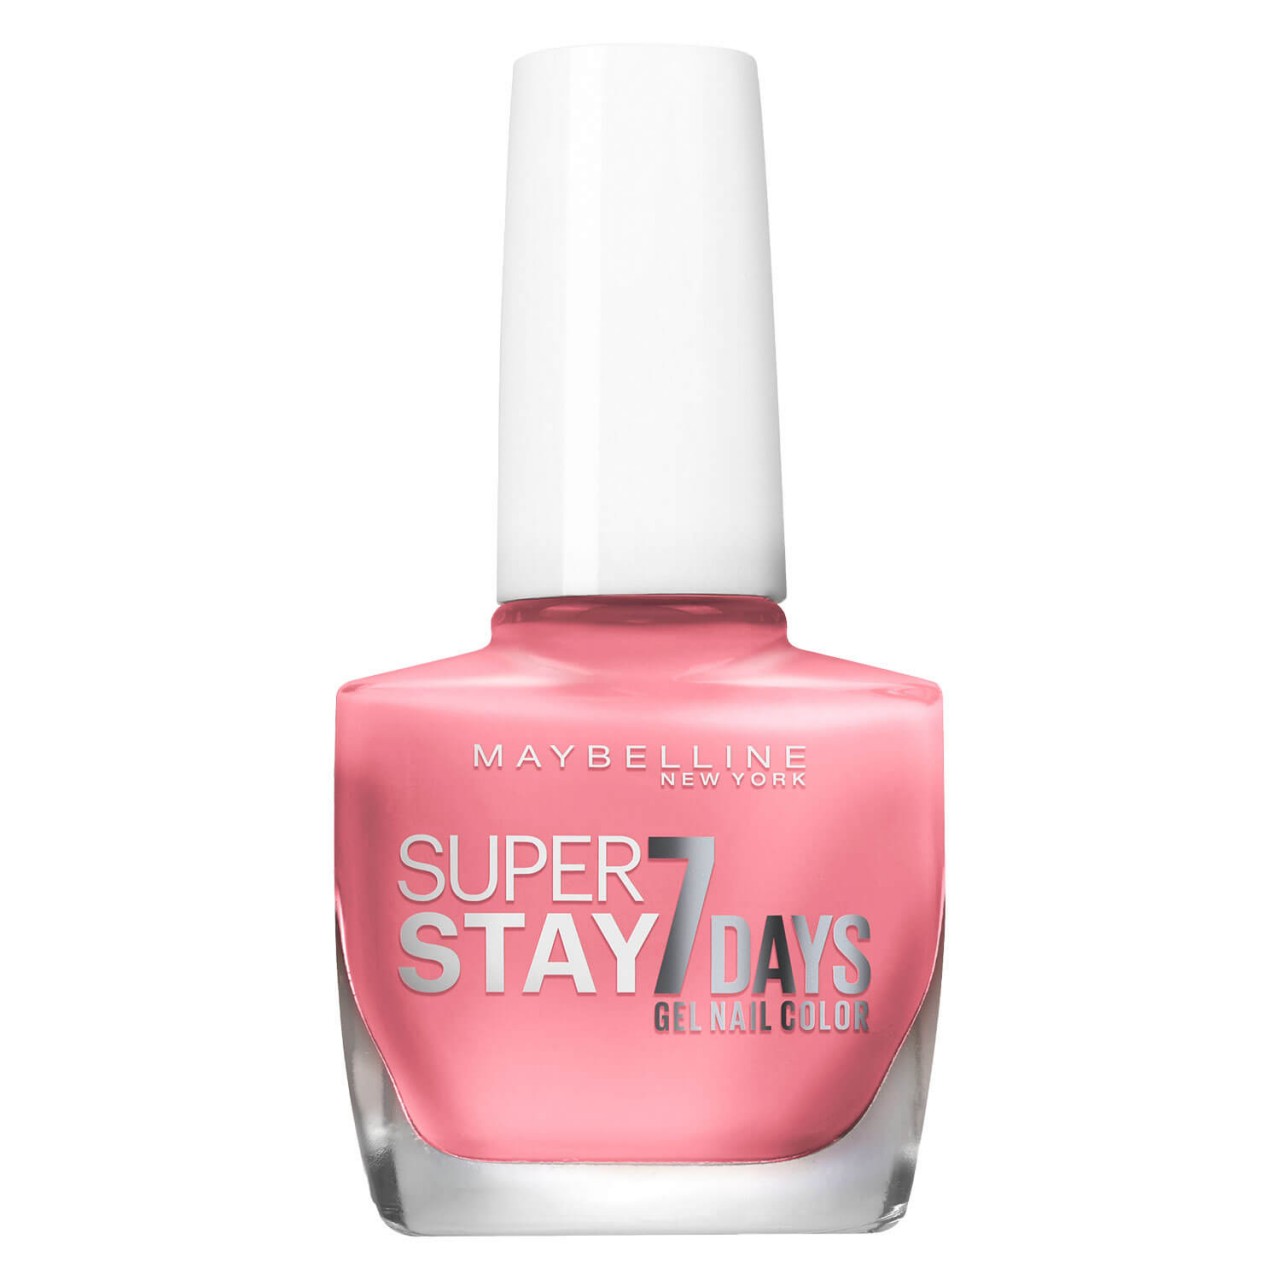 Maybelline NY Nails - Super Stay 7 Days Nagellack Nr. 926 Pink about it von Maybelline New York